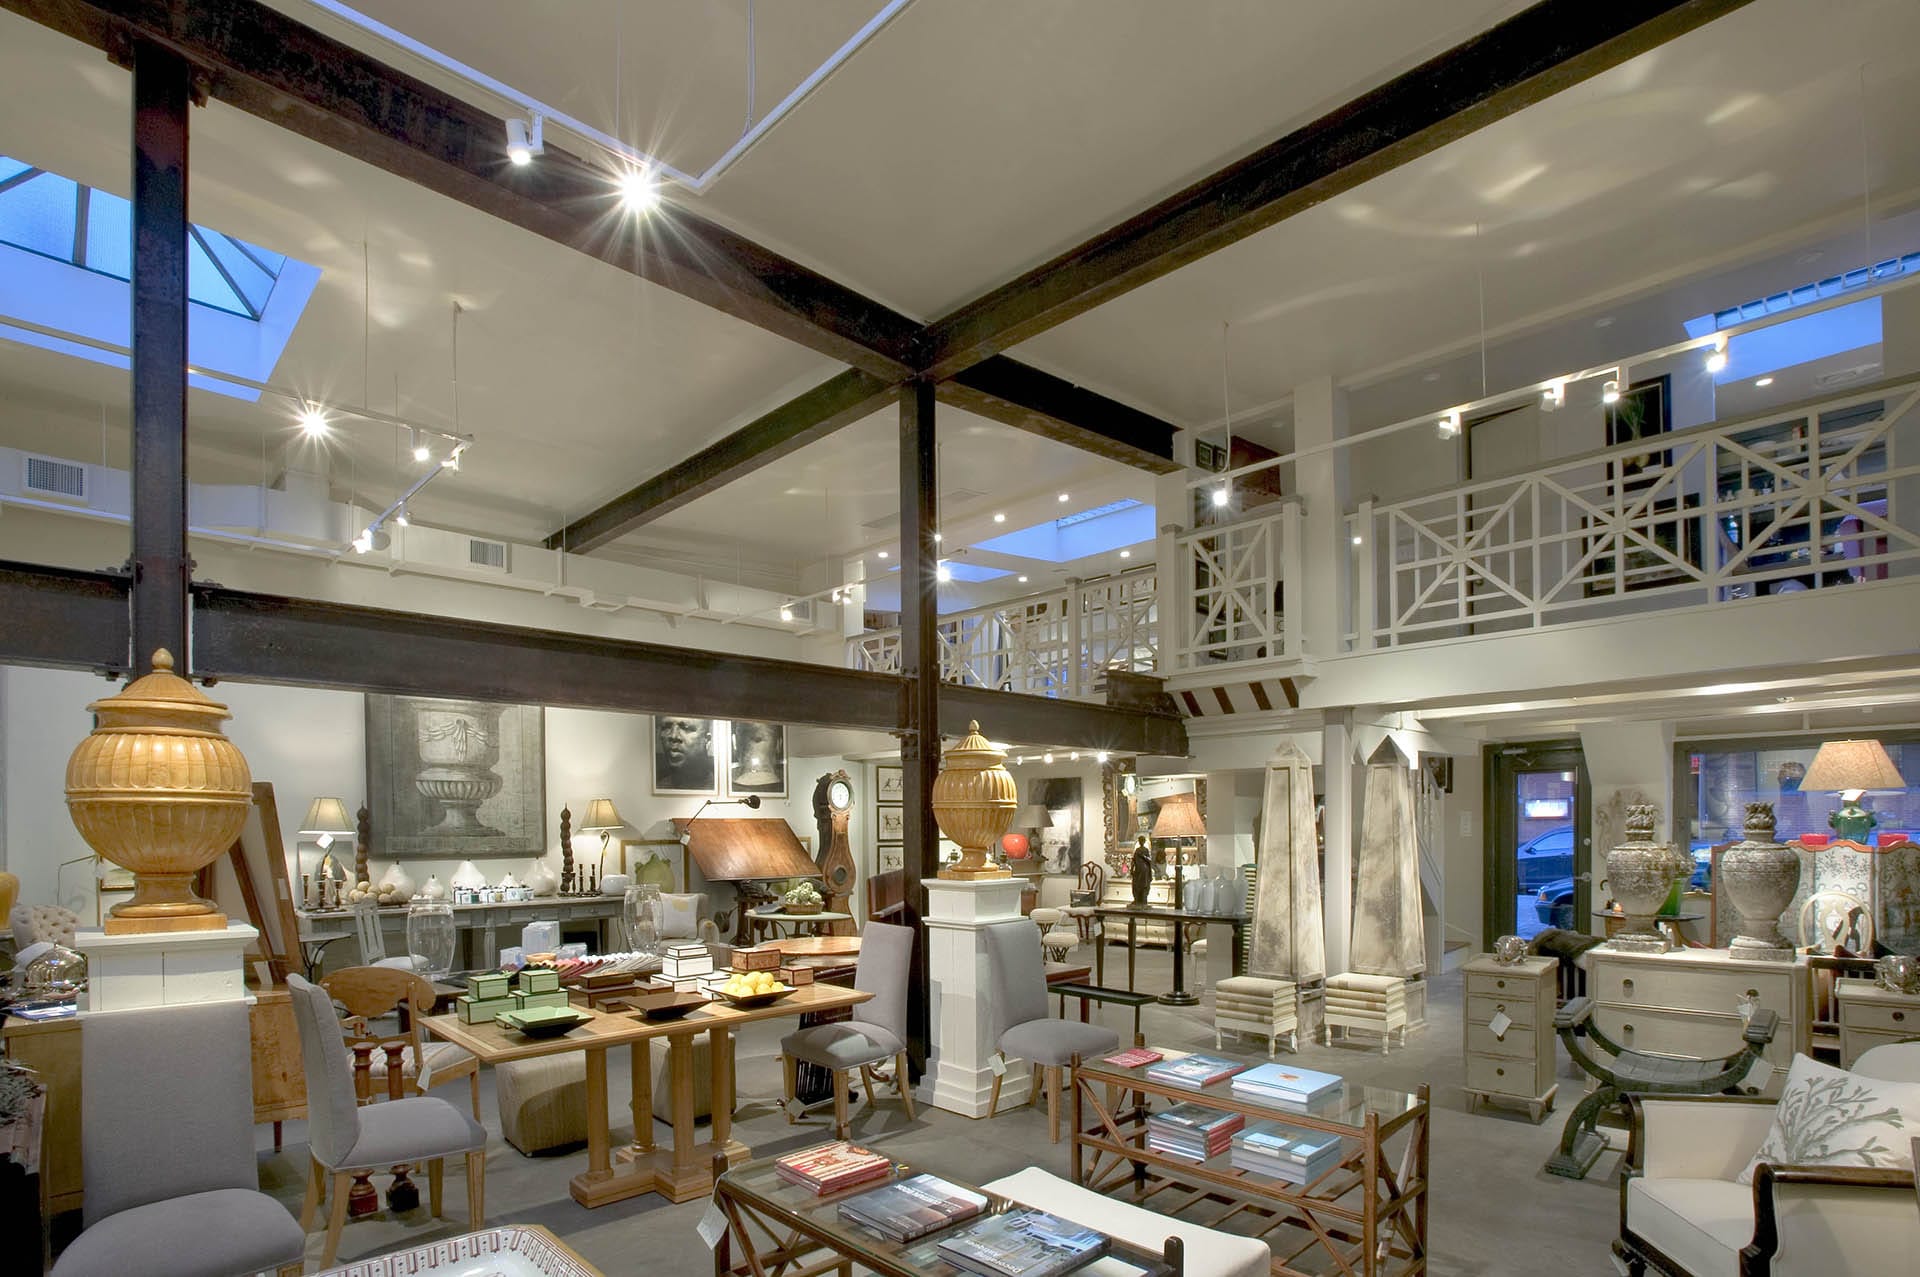 Photo of the inside of an antique shop. The walls and ceilings are painted white, large aged metal beams are both decorative and supportive, and a mezzanine with spiderweb-like railings is visible at the top right of the photo.